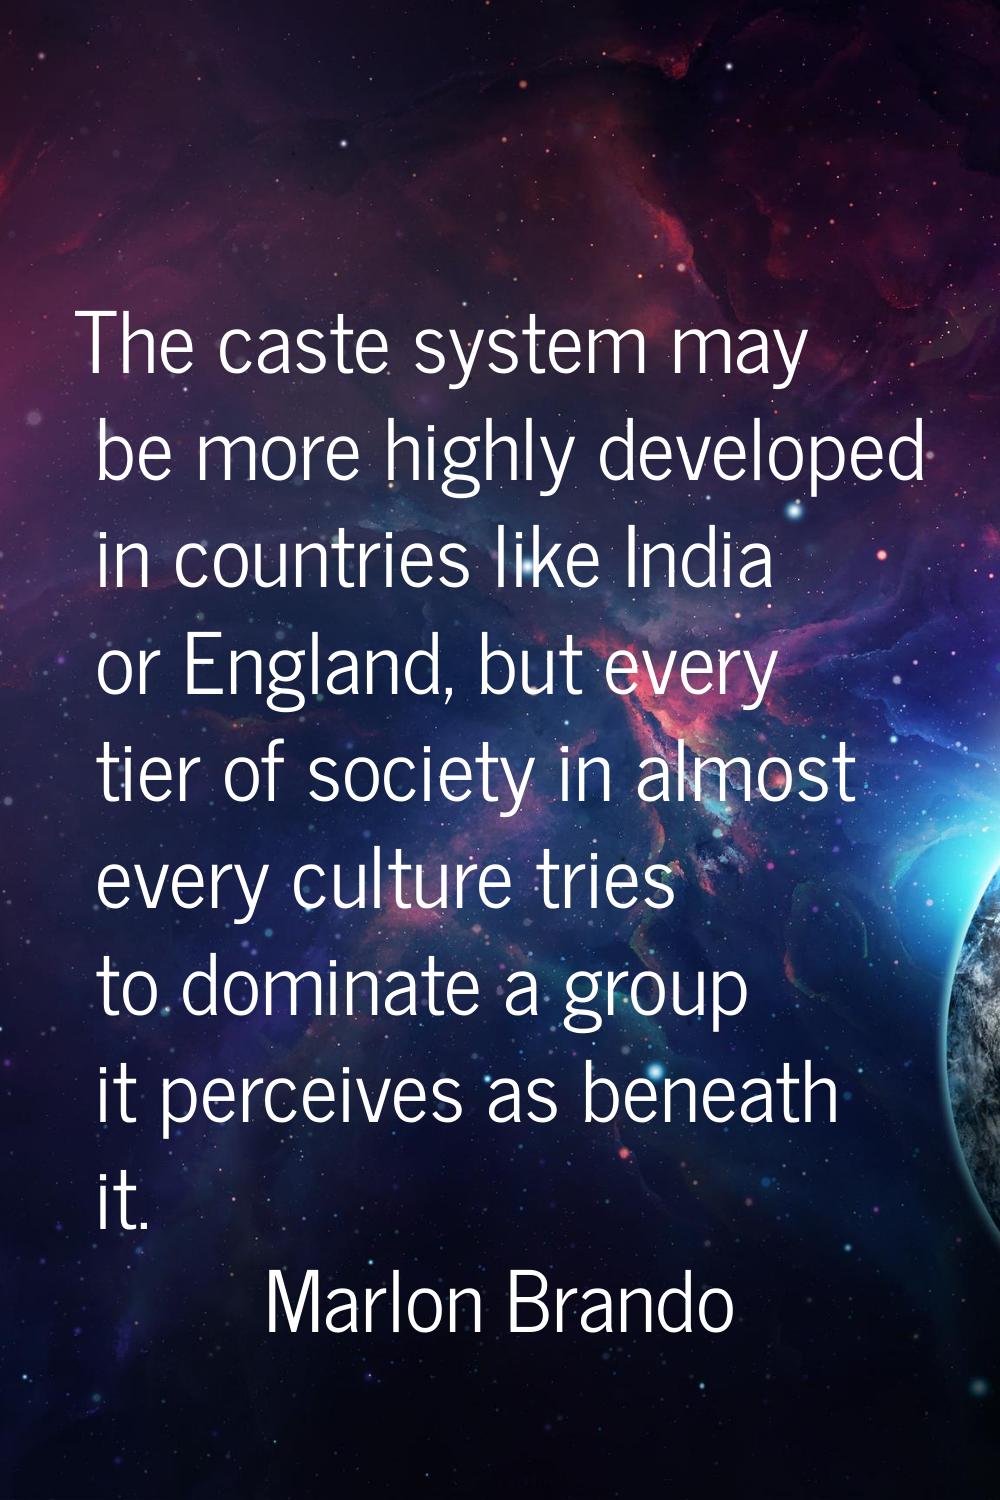 The caste system may be more highly developed in countries like India or England, but every tier of